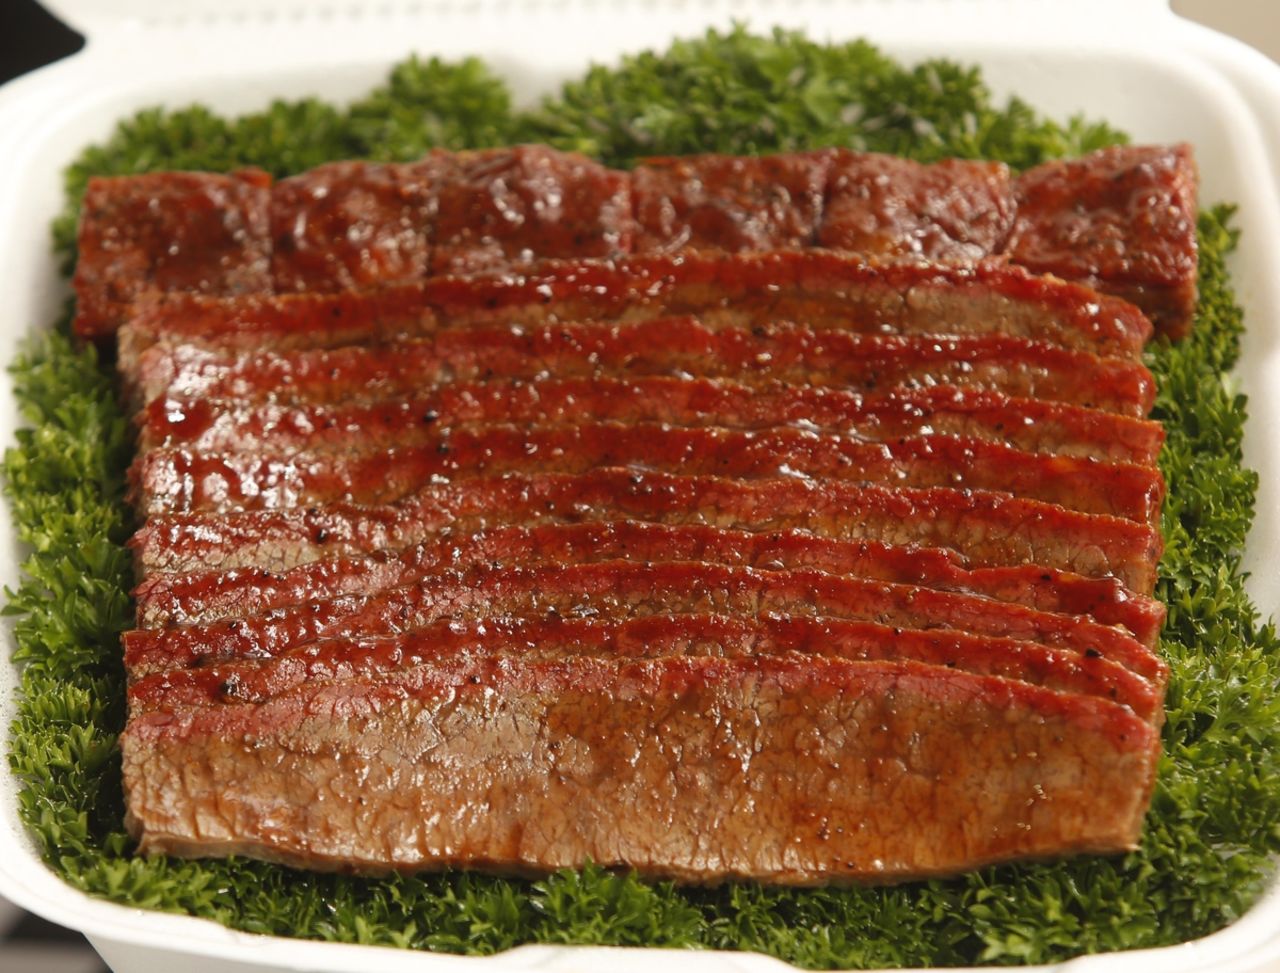 Brisket is also required, and tenderness, along with appearance and taste, is key.